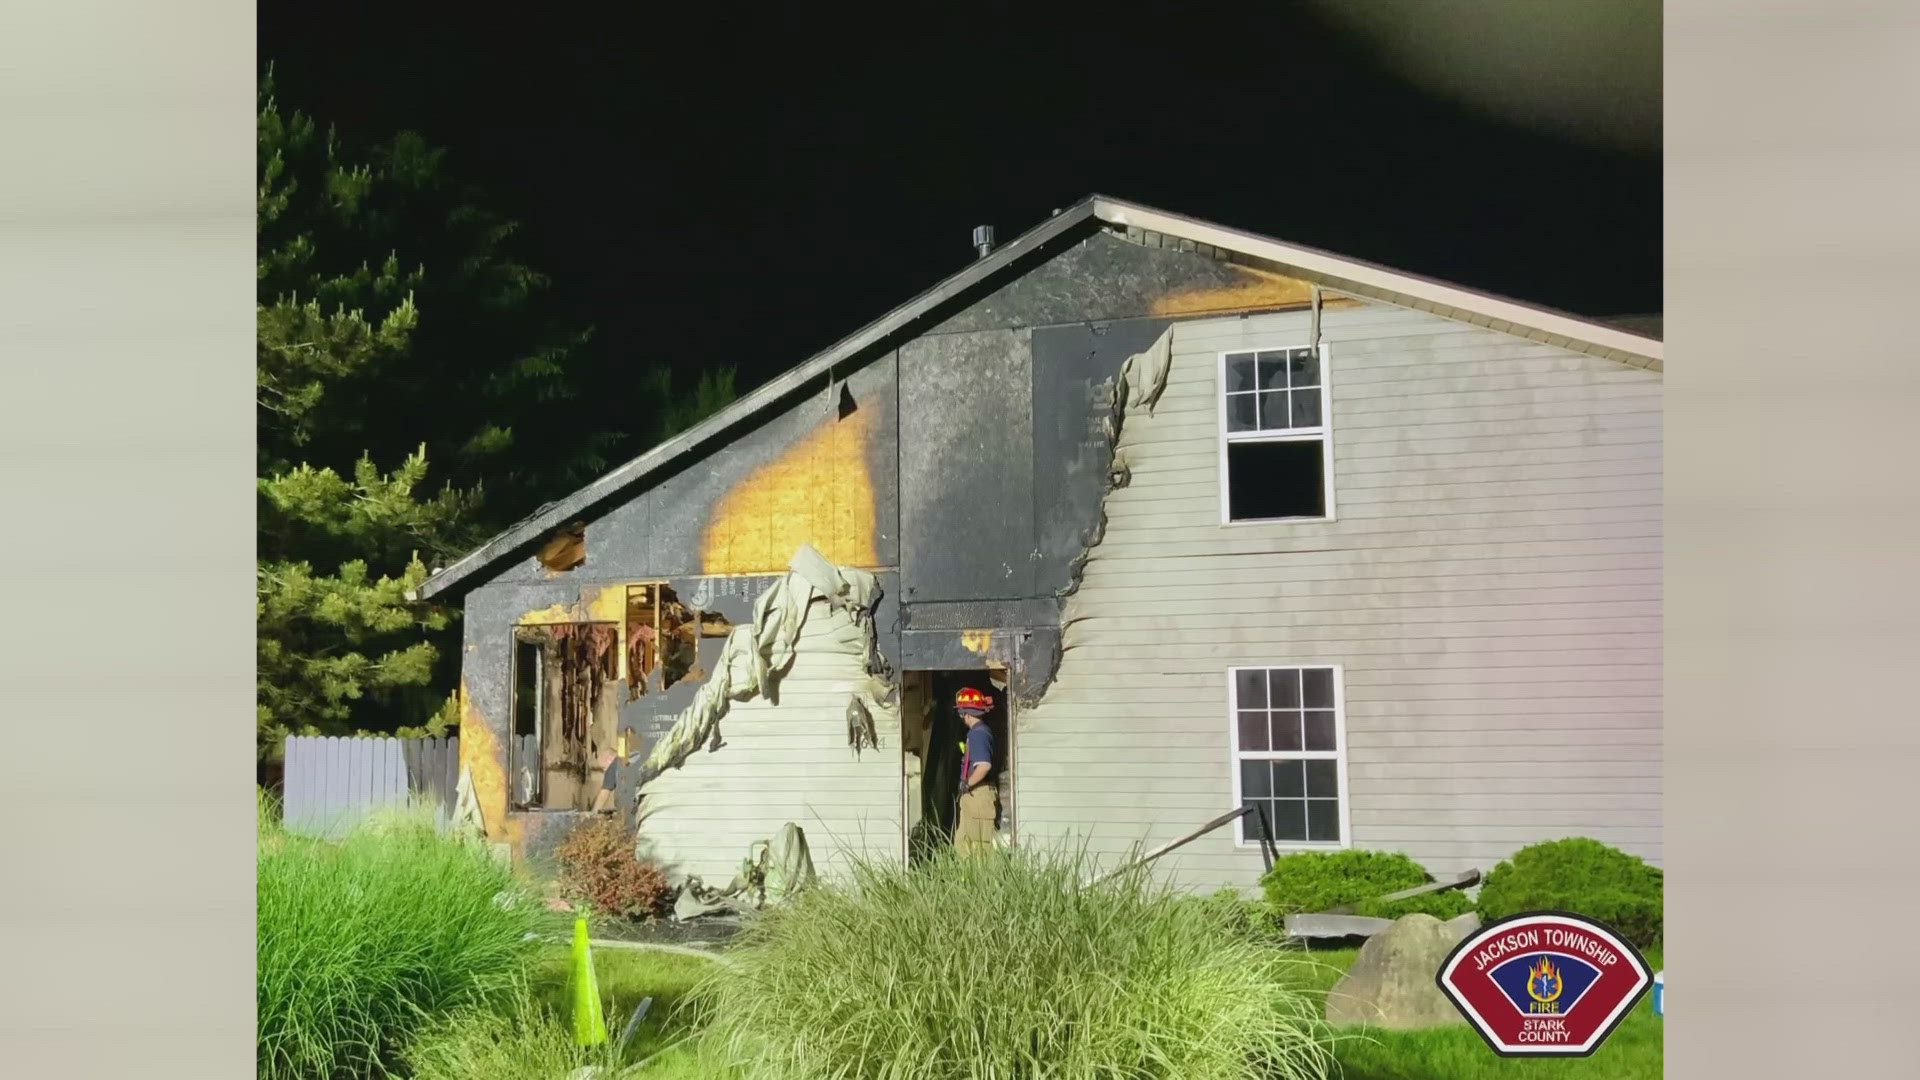 ​According to the Jackson Township Fire Department, the fire took place around 9:45 p.m. Saturday in a building on Harris Avenue Northwest.